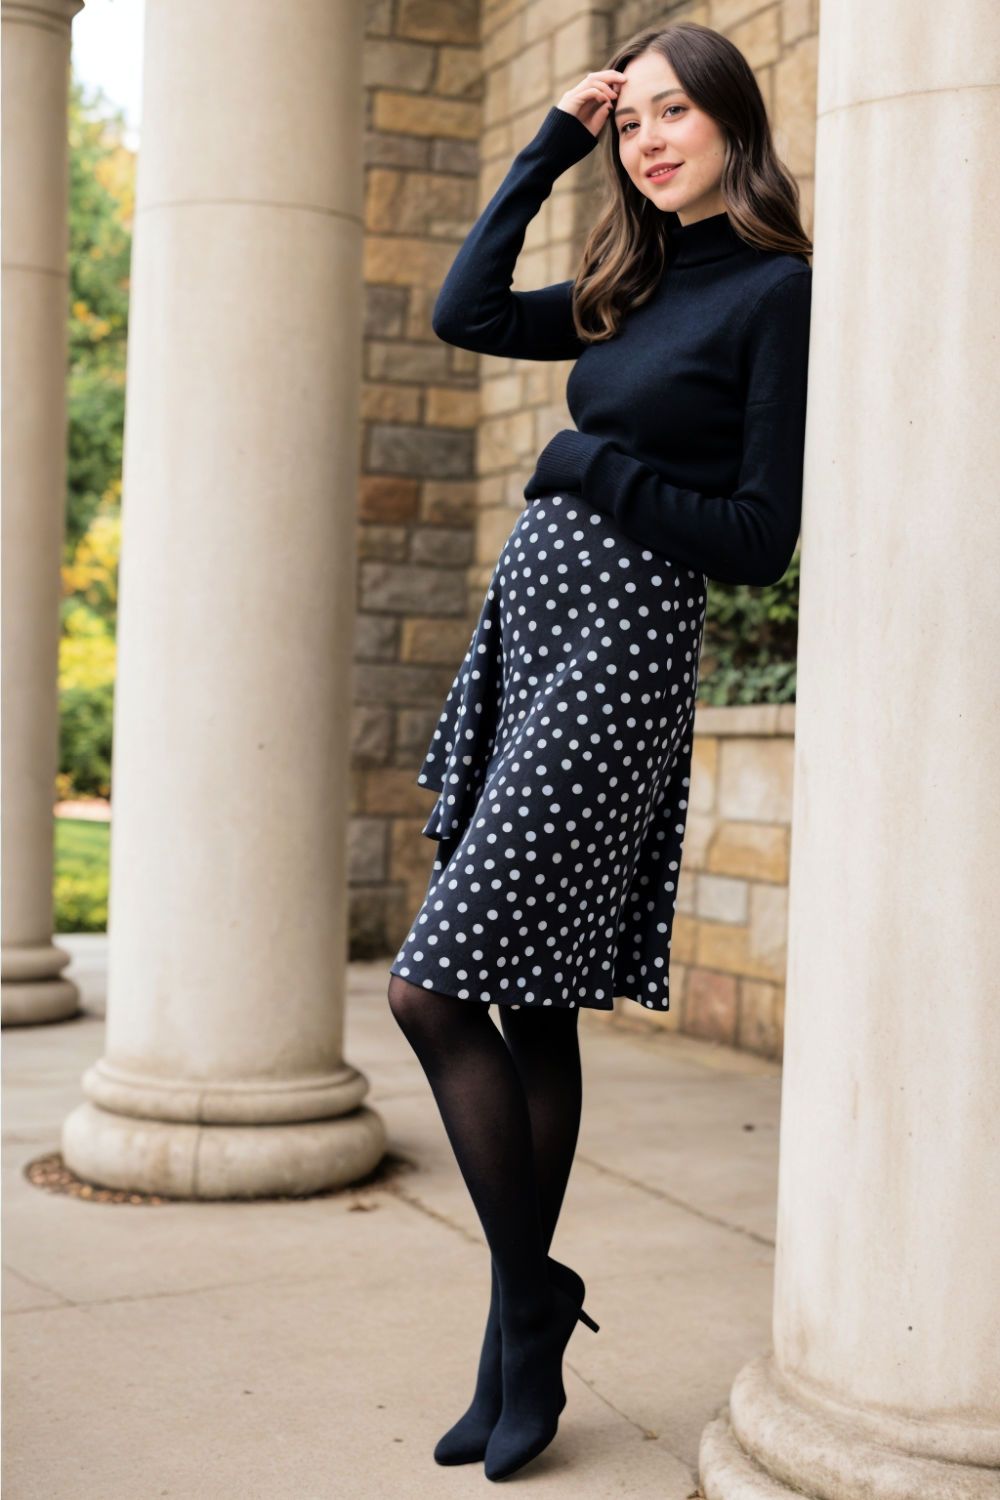 polka dot skirt and sweater for baby shower outfit